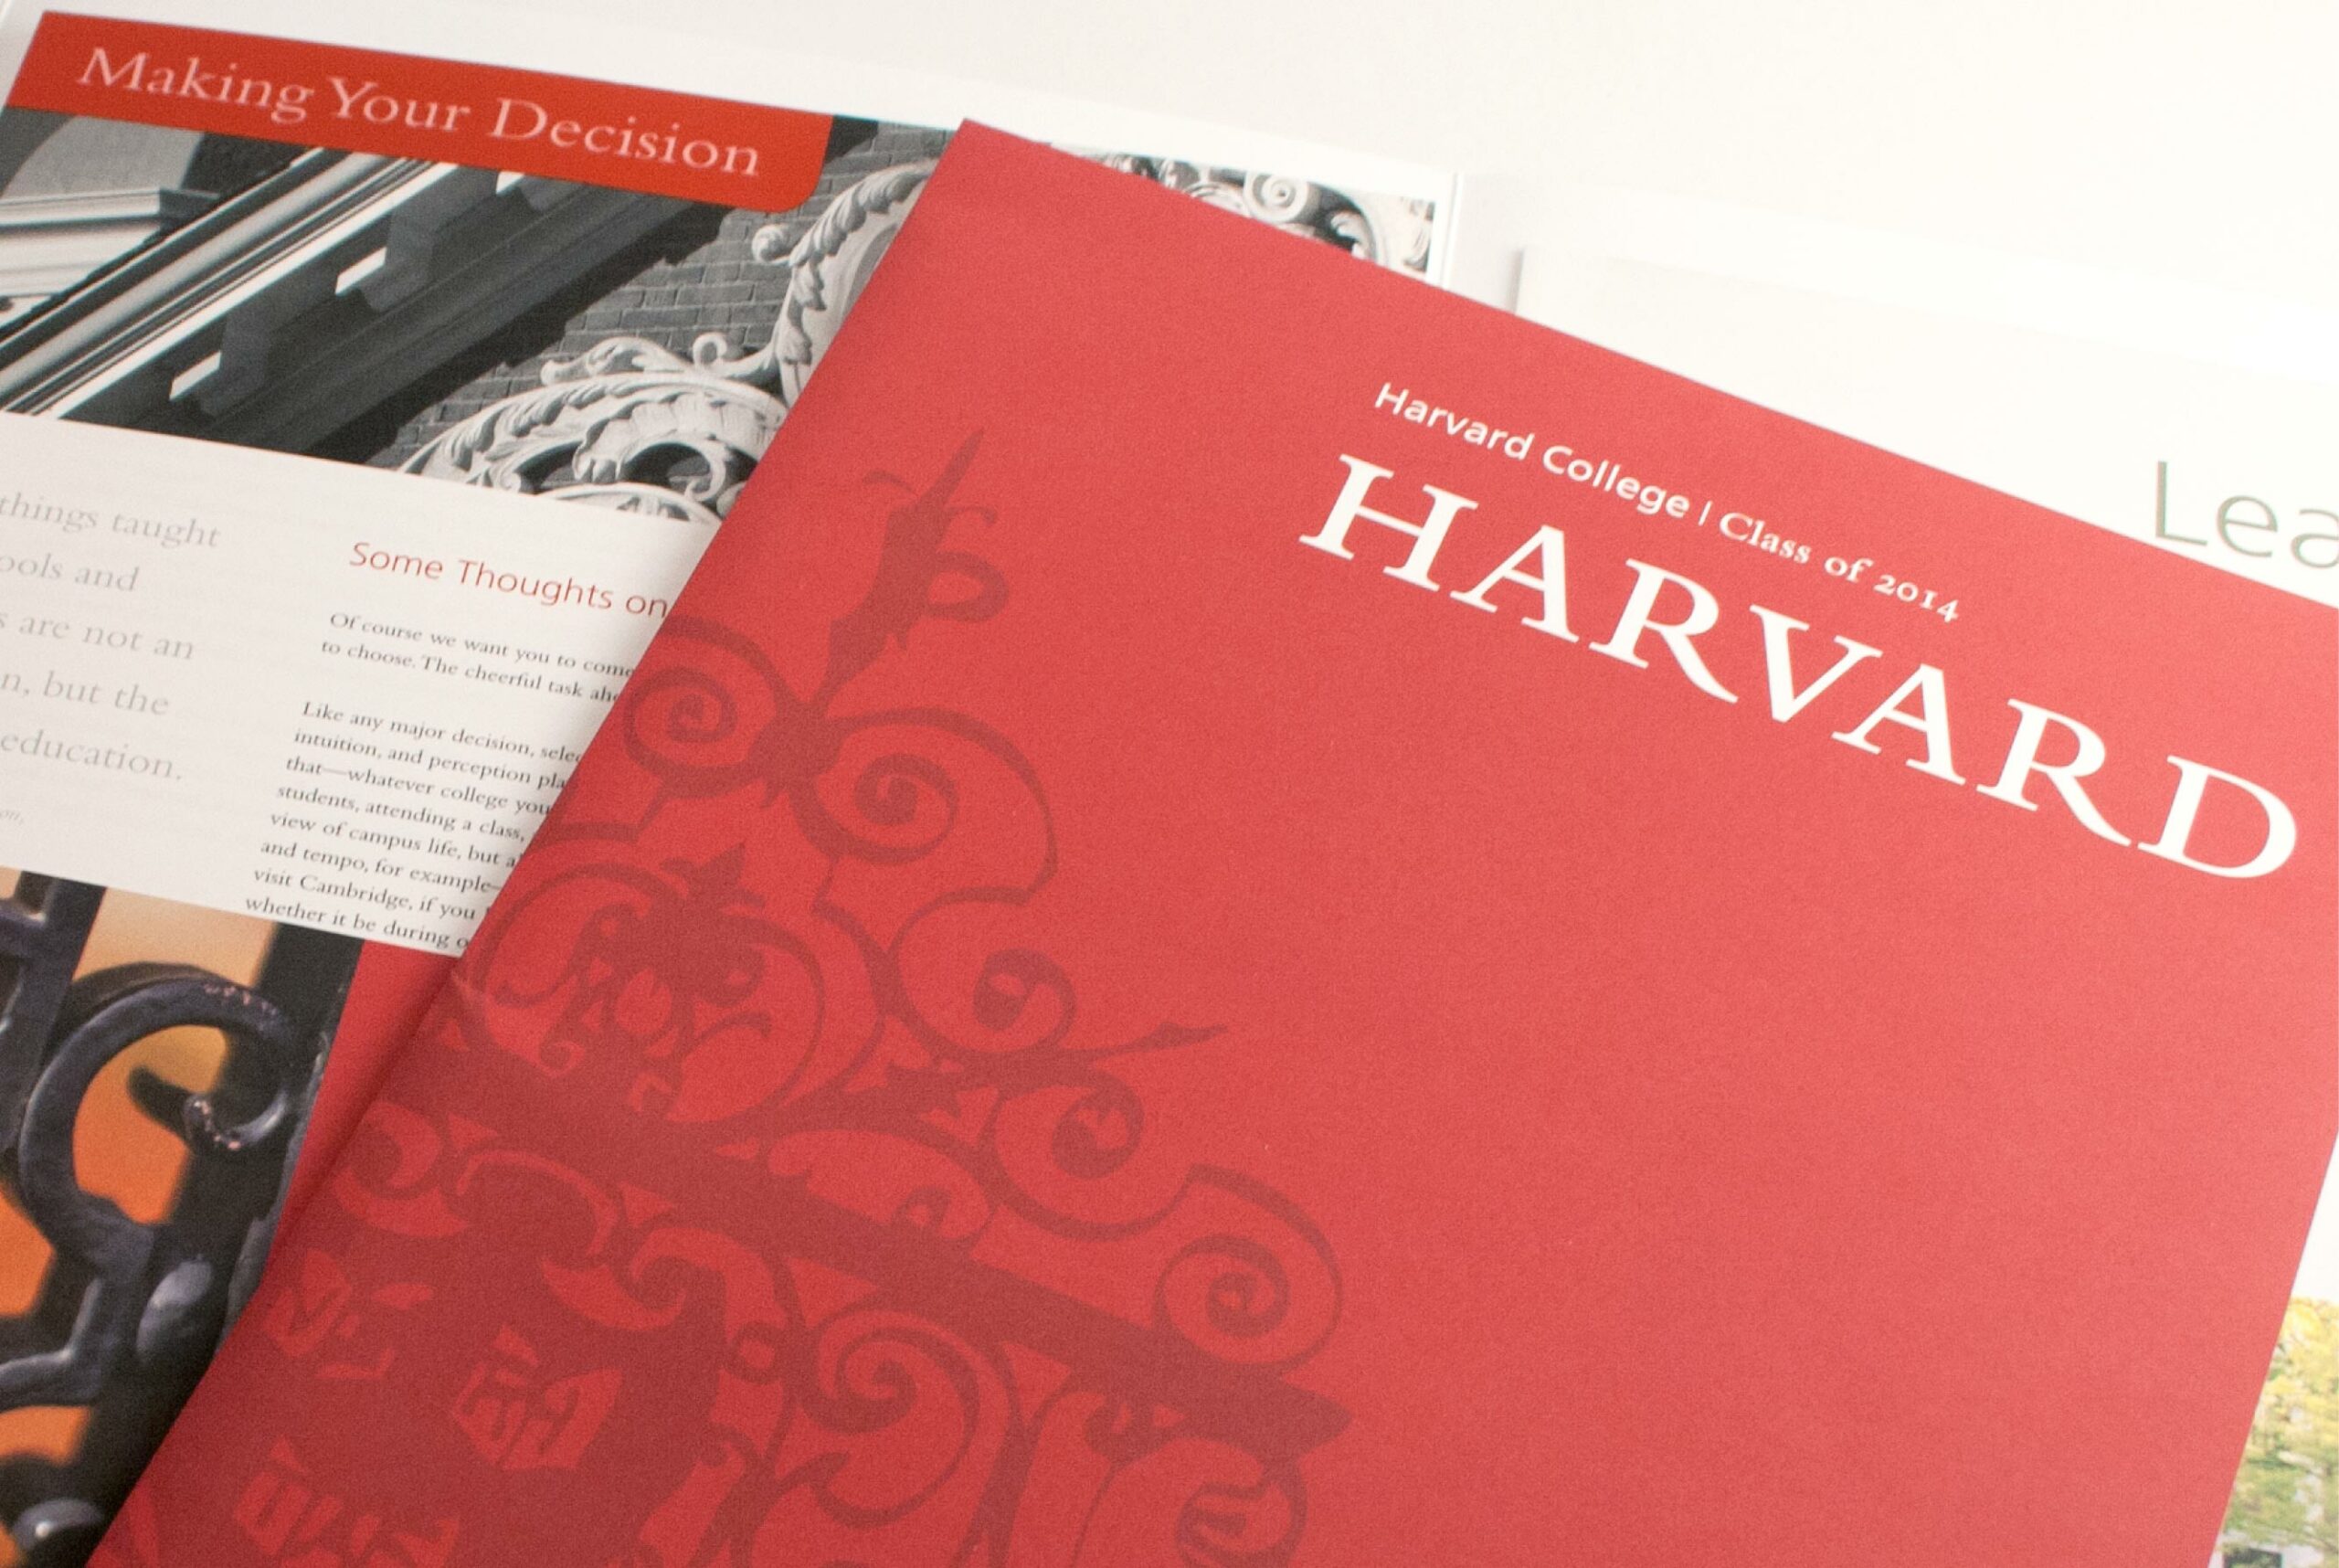 Red book with title Harvard College Class of 2014